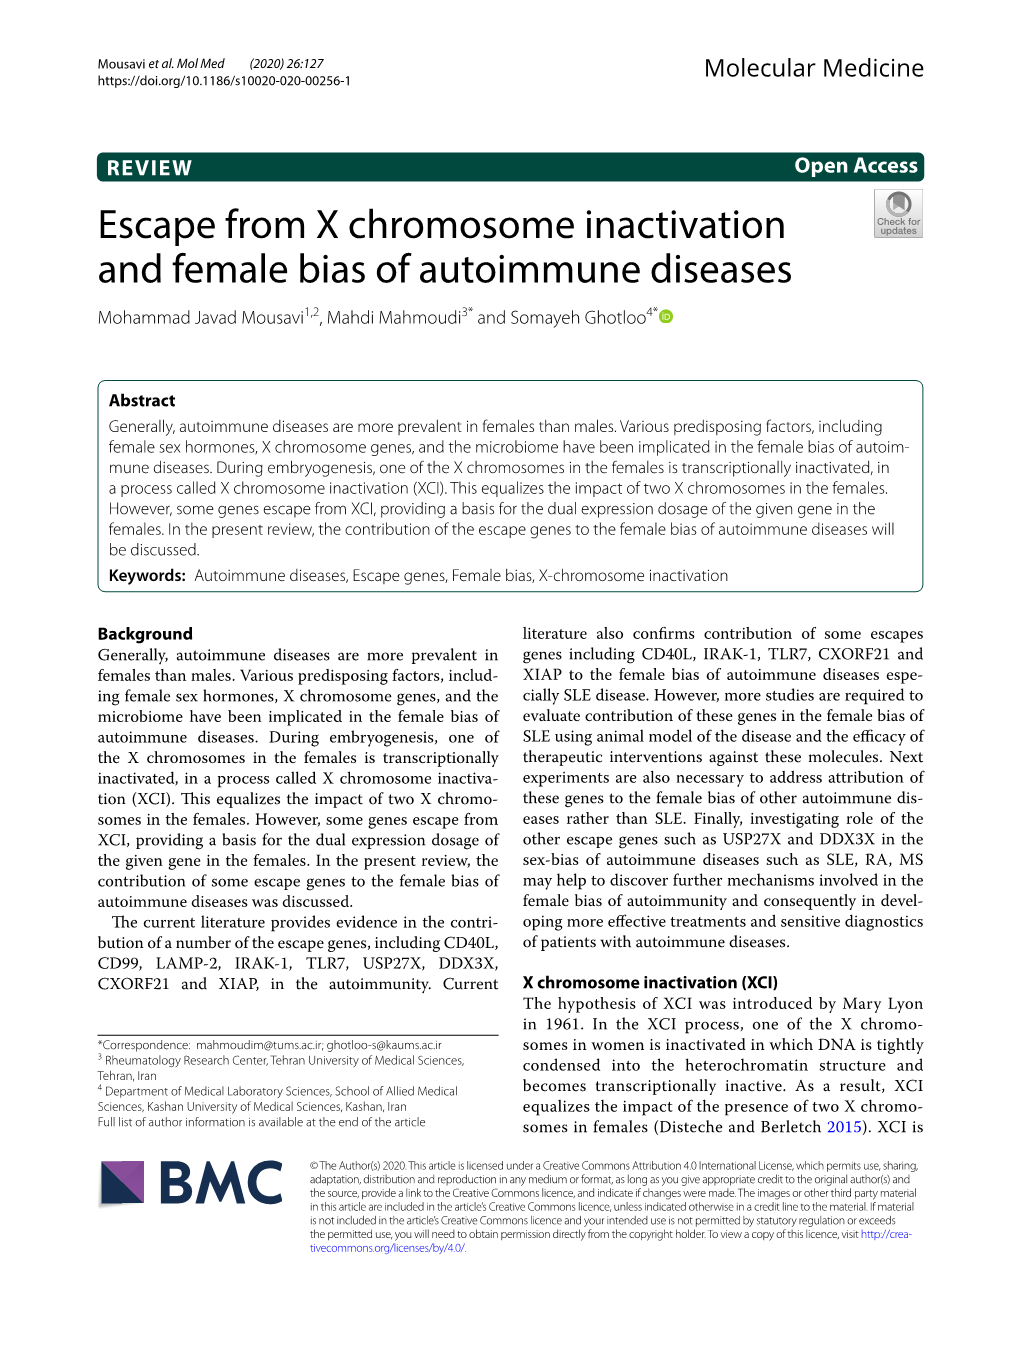 Escape from X Chromosome Inactivation and Female Bias of Autoimmune Diseases Mohammad Javad Mousavi1,2, Mahdi Mahmoudi3* and Somayeh Ghotloo4*